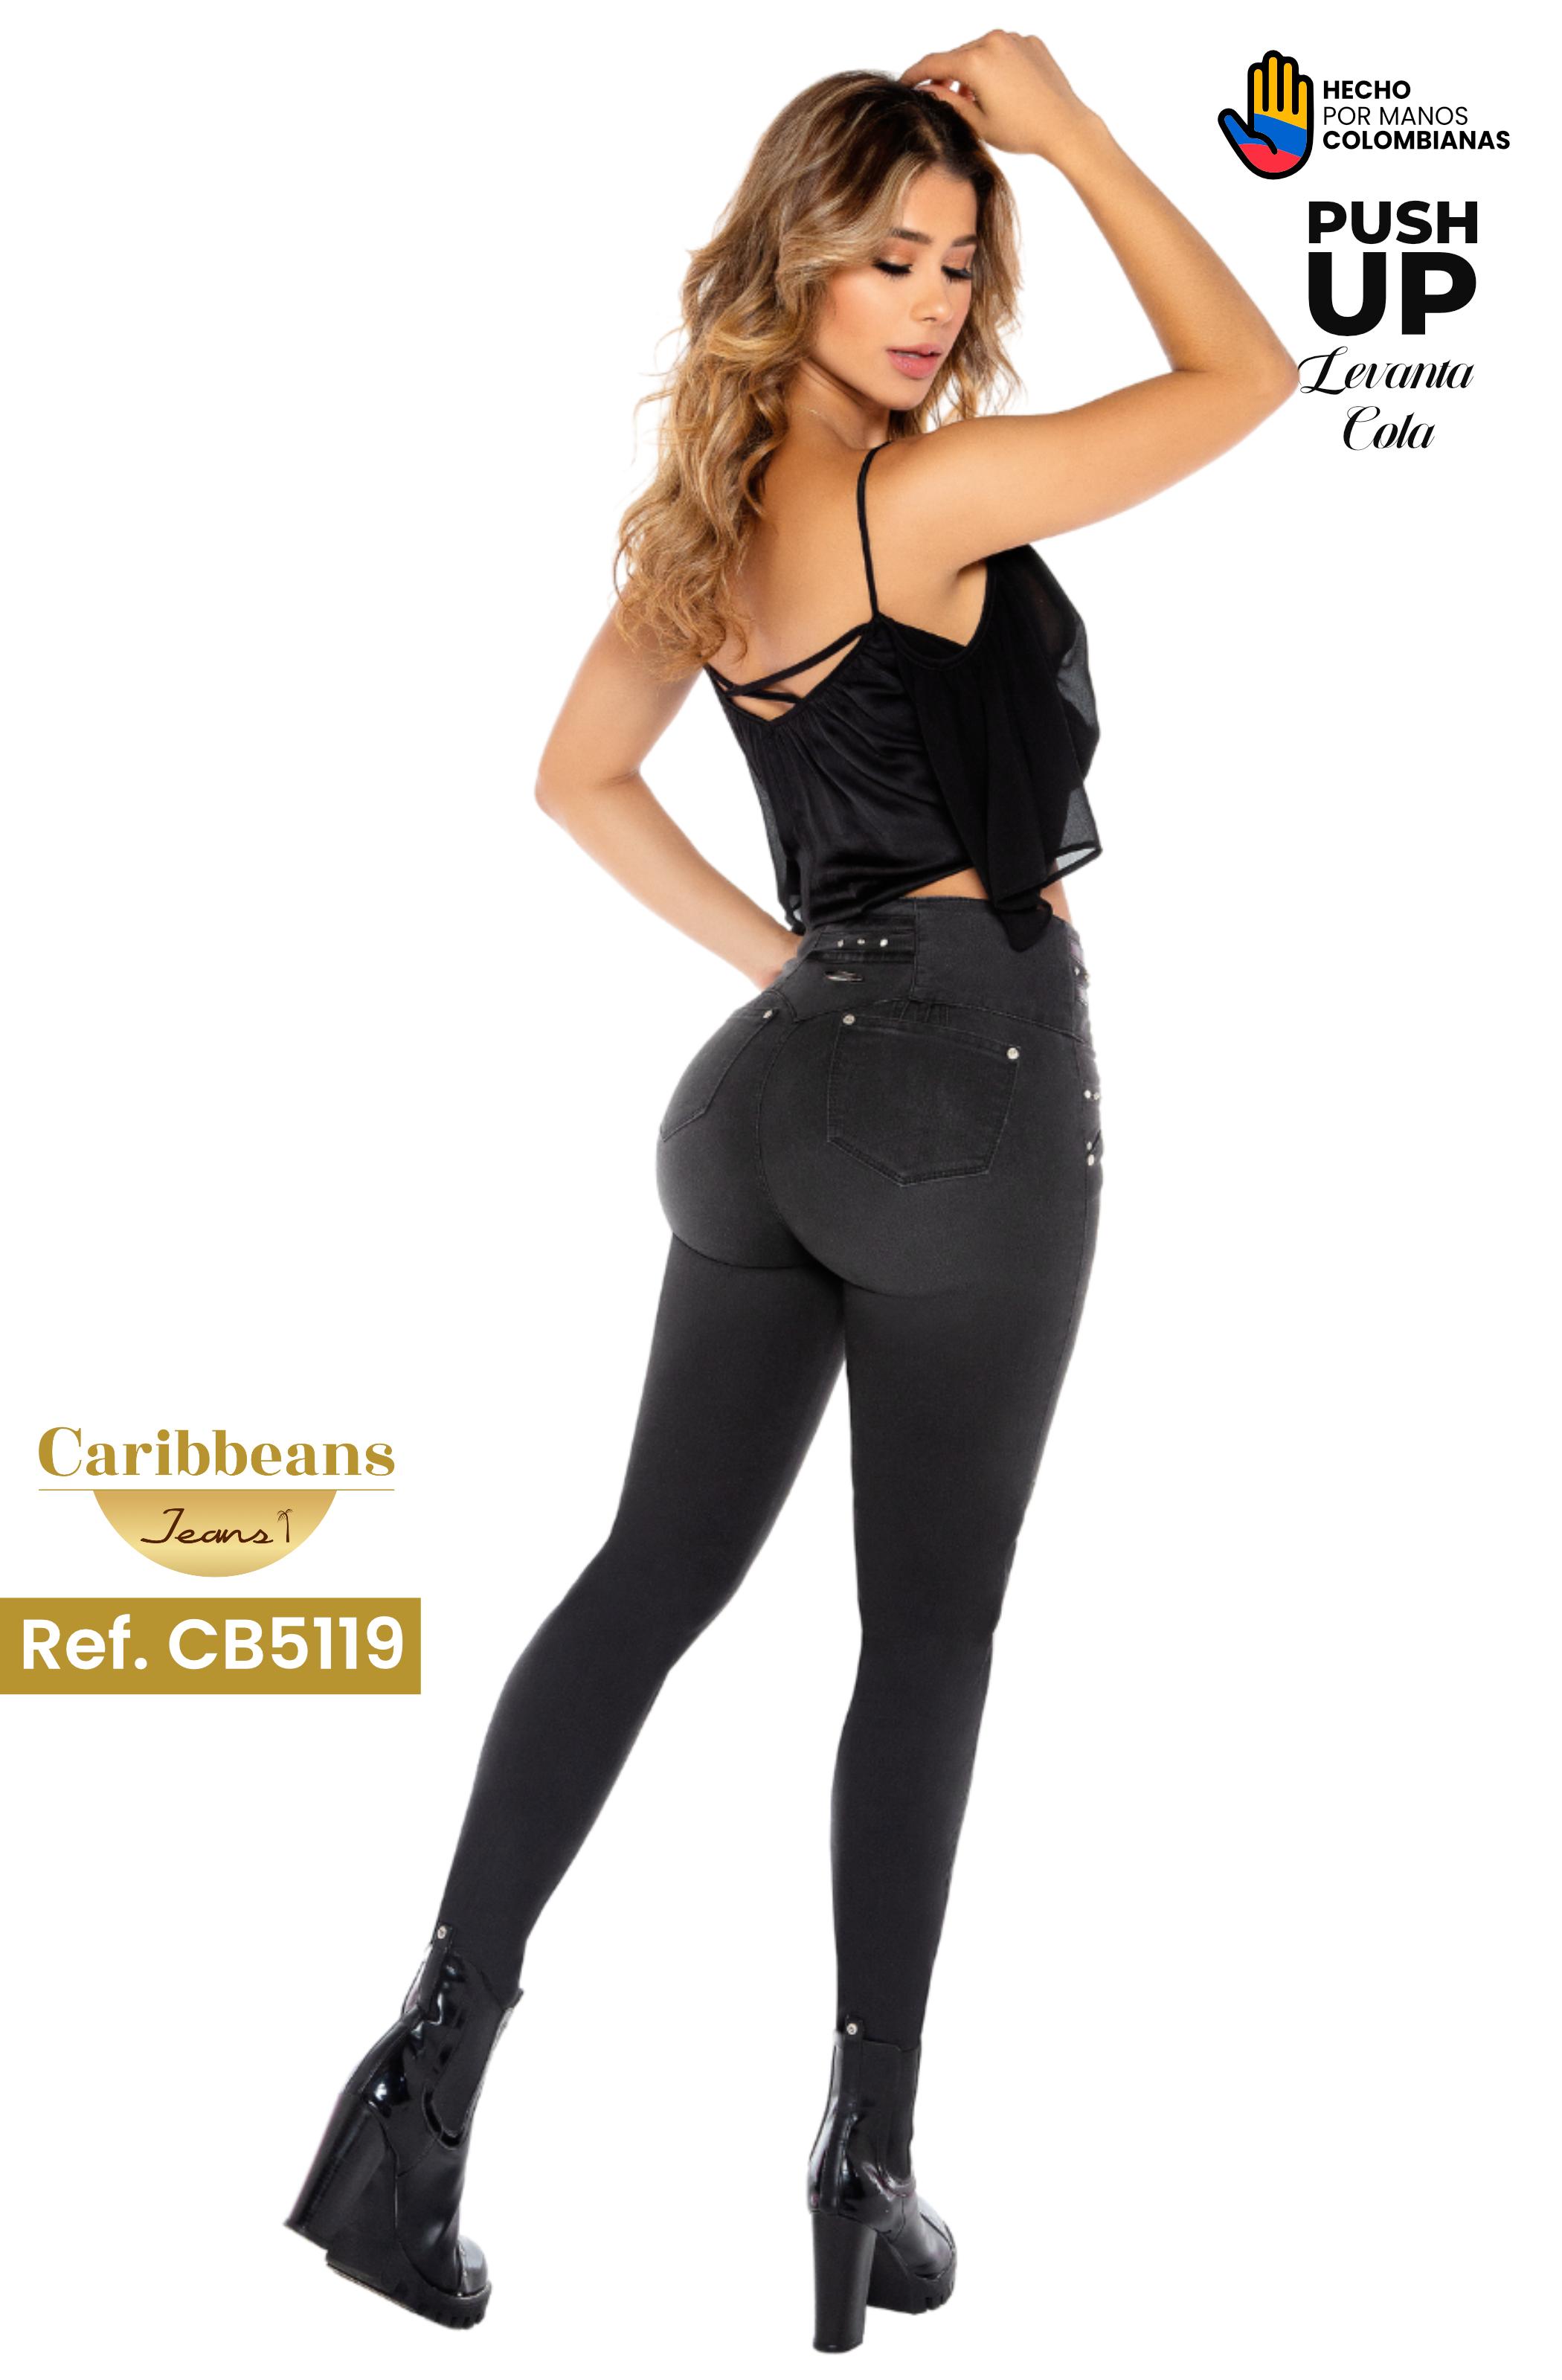 Colombian jeans push up